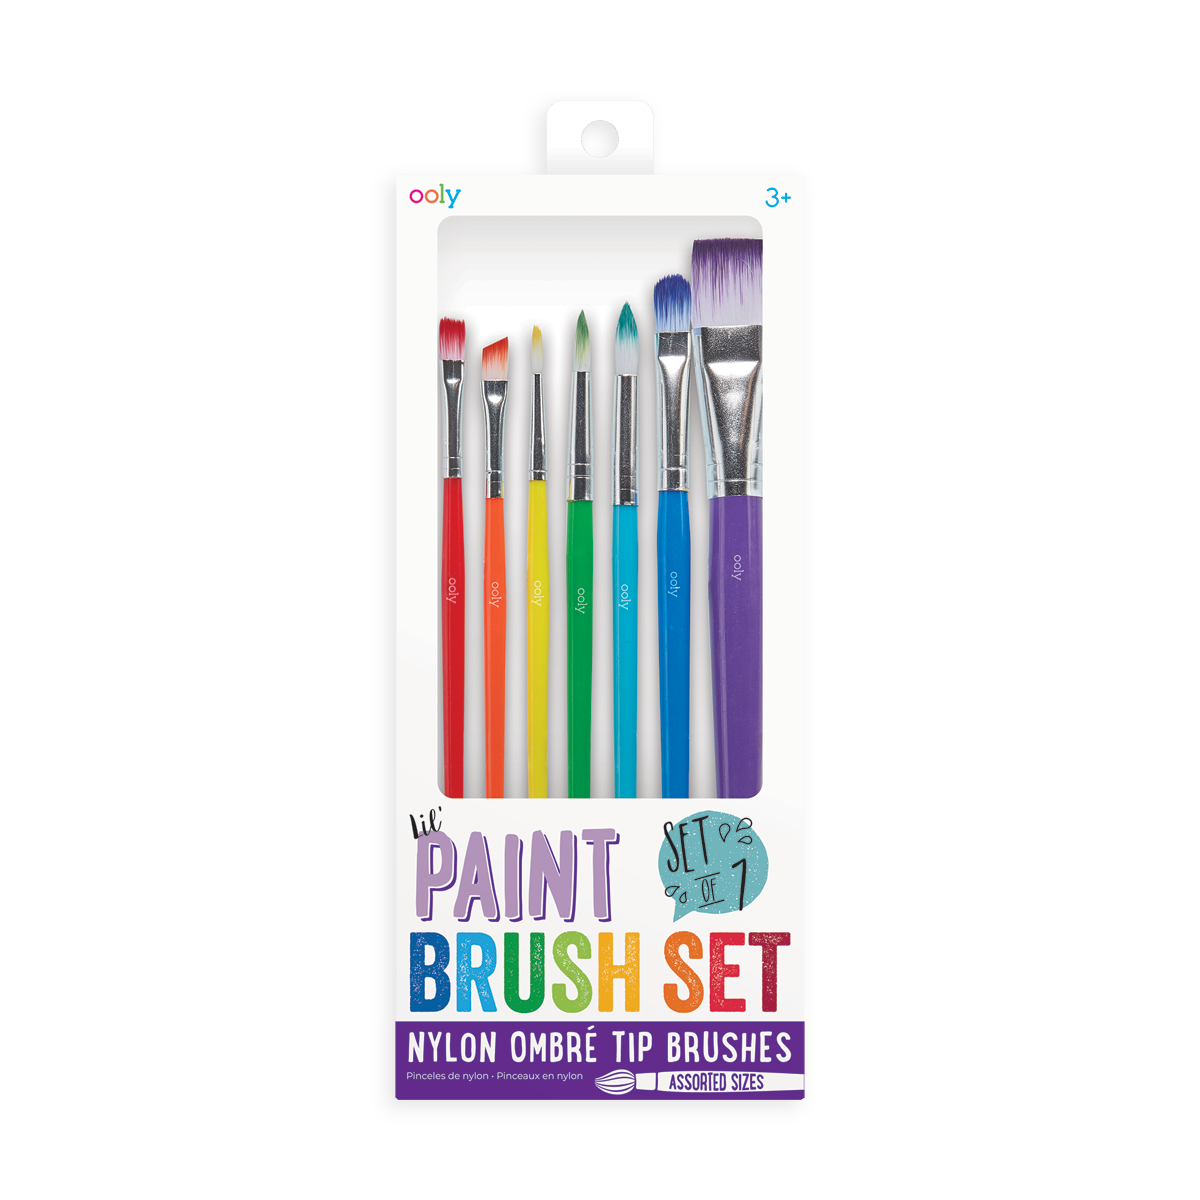 Exploring The Best Brushes for Painting on Canvas